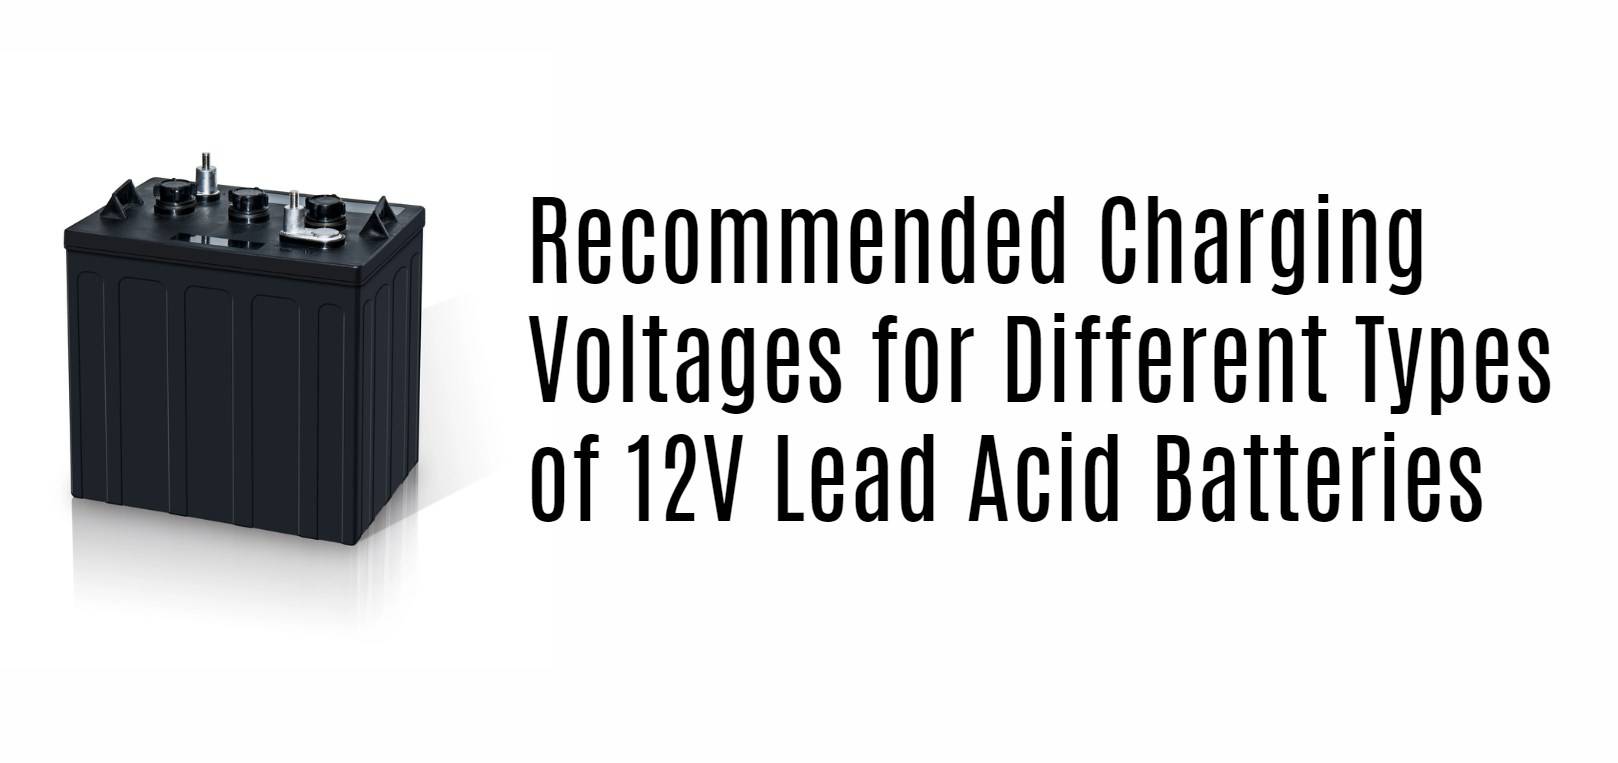 Recommended Charging Voltages for Different Types of 12V Lead Acid Batteries